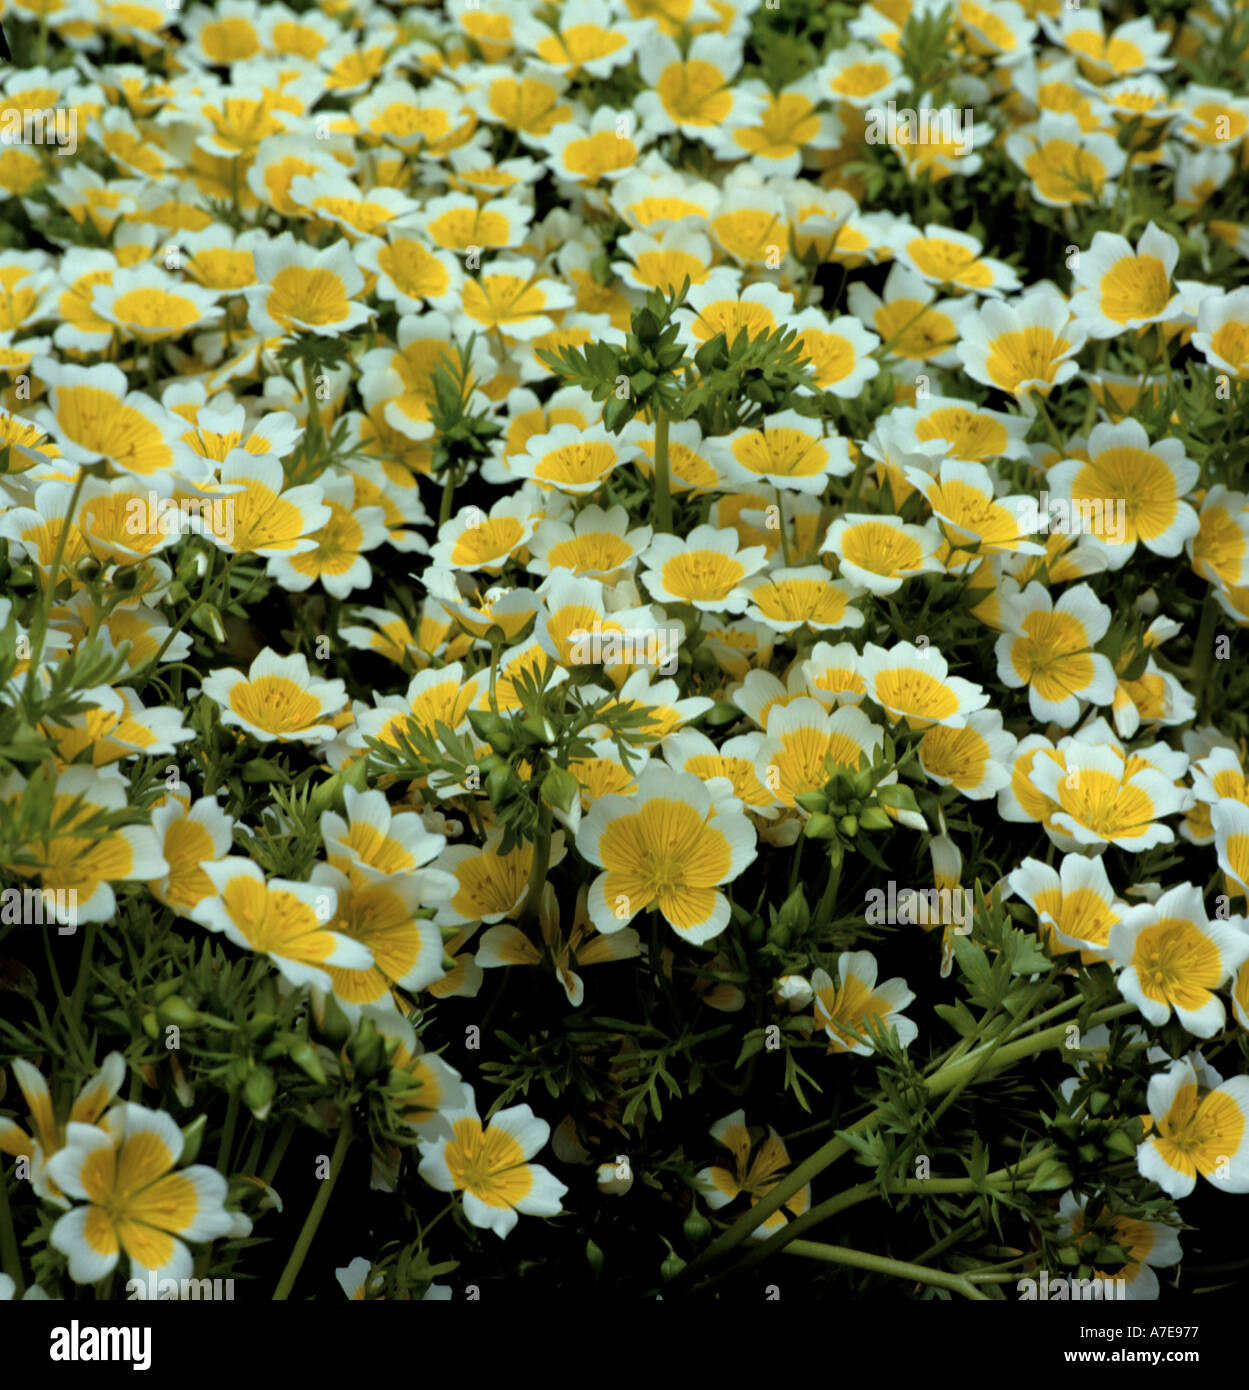 Limnanthes or Poached egg plant (Limnanthes douglasii). Stock Photo